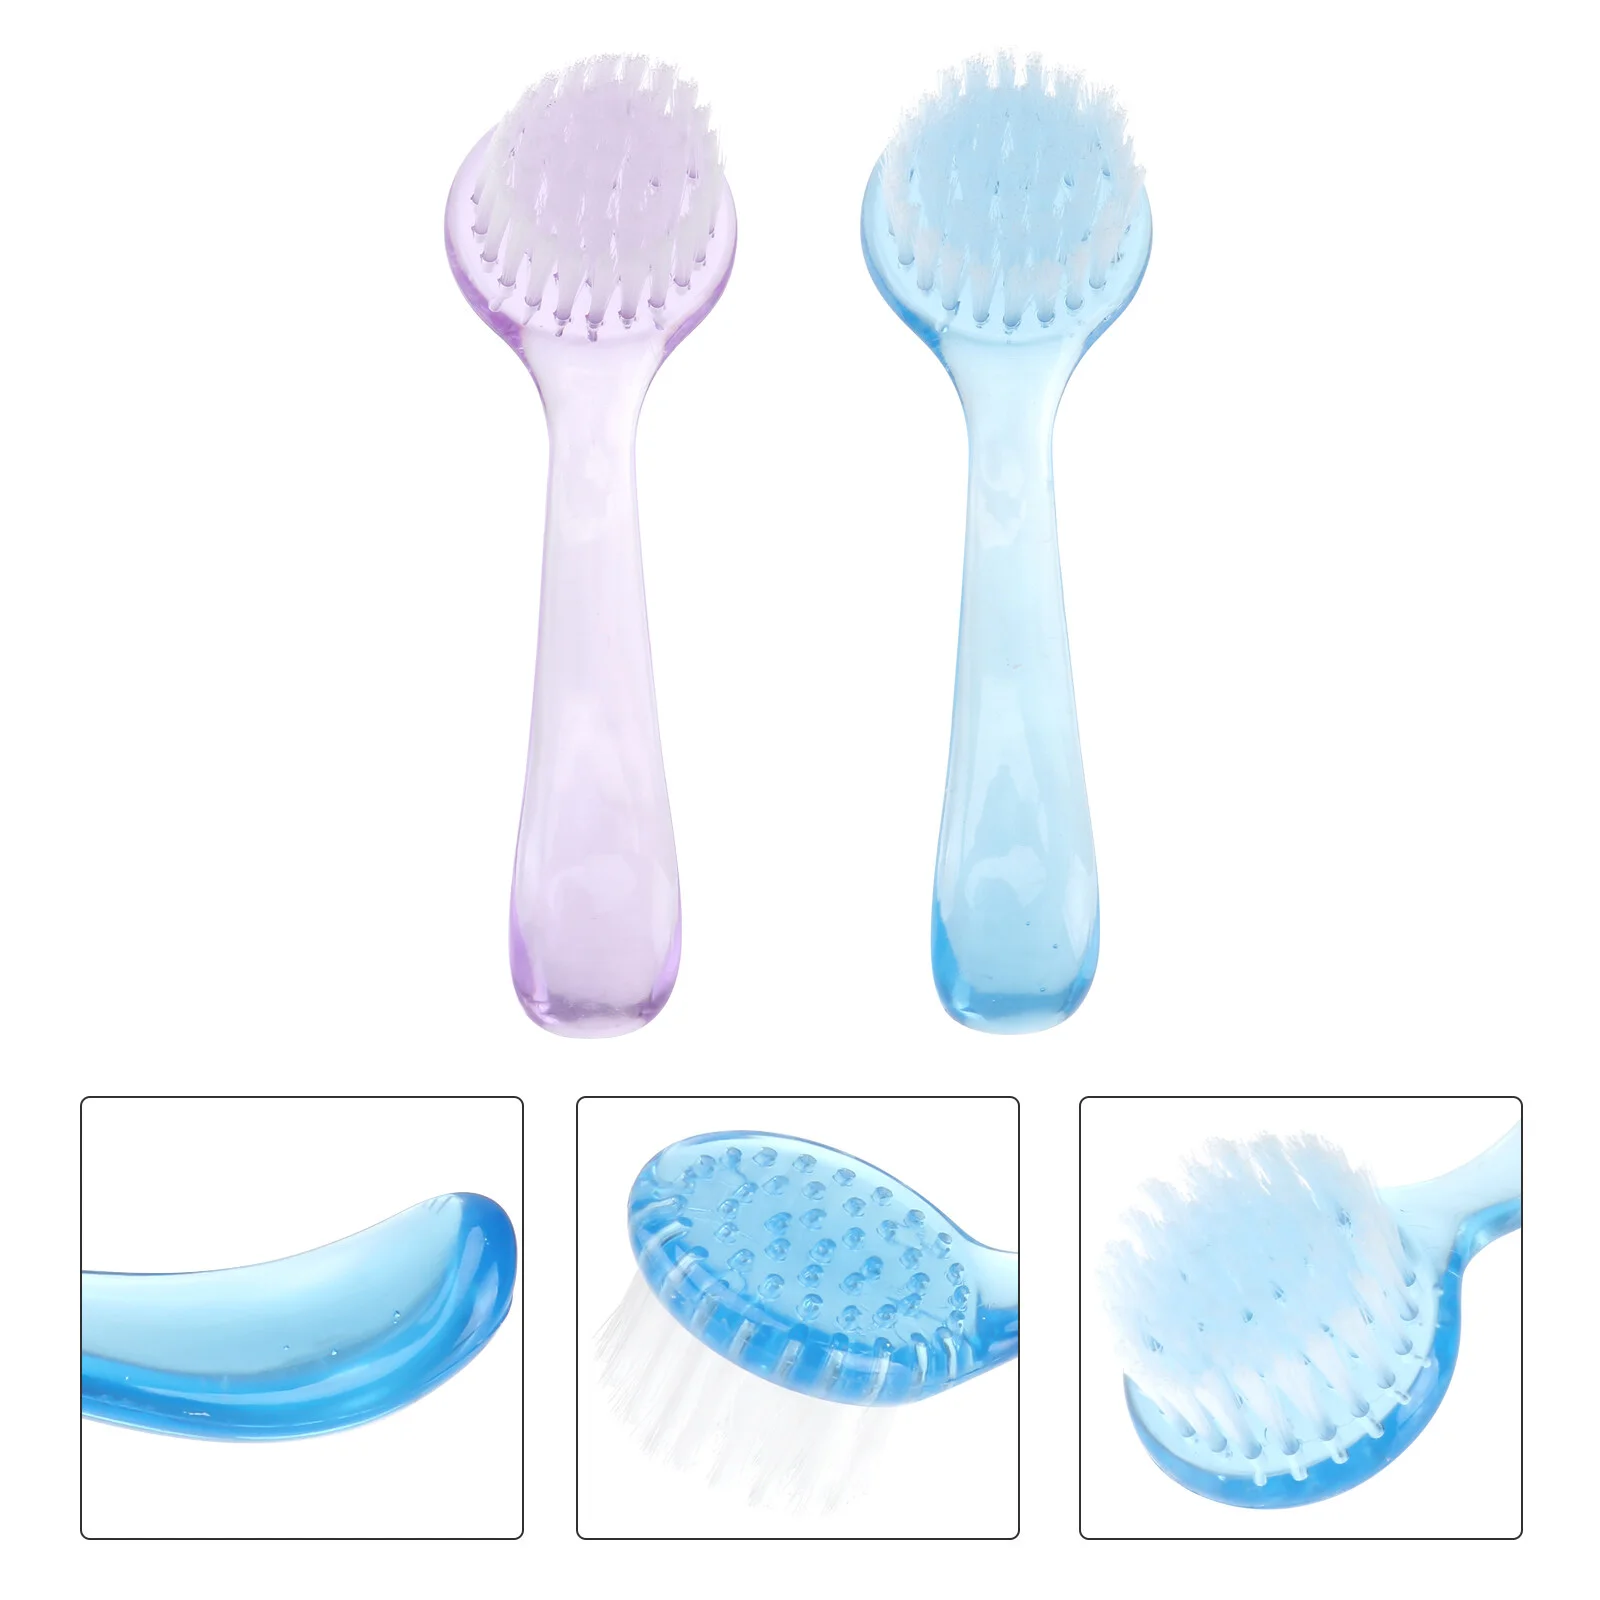 

Brush Face Facial Cleansing Scrubber Cleaning Scrub Exfoliating Silicone Brushes Wash Manual Exfoliator Skin Cleanser Deep Care